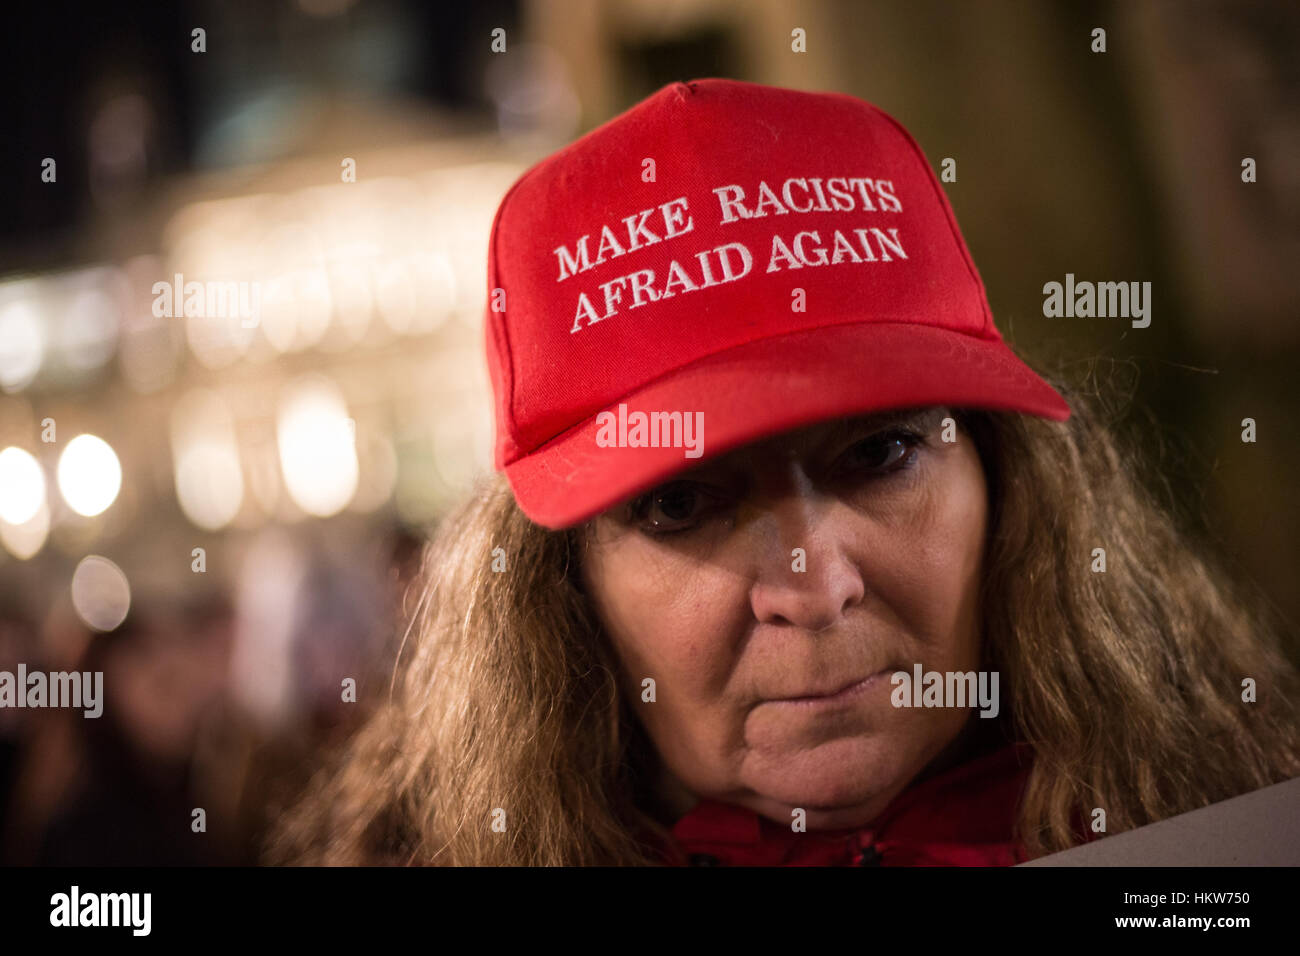 Glasgow, UK. 30th Jan, 2017. Protest against the policies and Presidency of Donald Trump, President of the United States of America, in George Square, Glasgow, Scotland, on 30 January 2017. Credit: jeremy sutton-hibbert/Alamy Live News Stock Photo